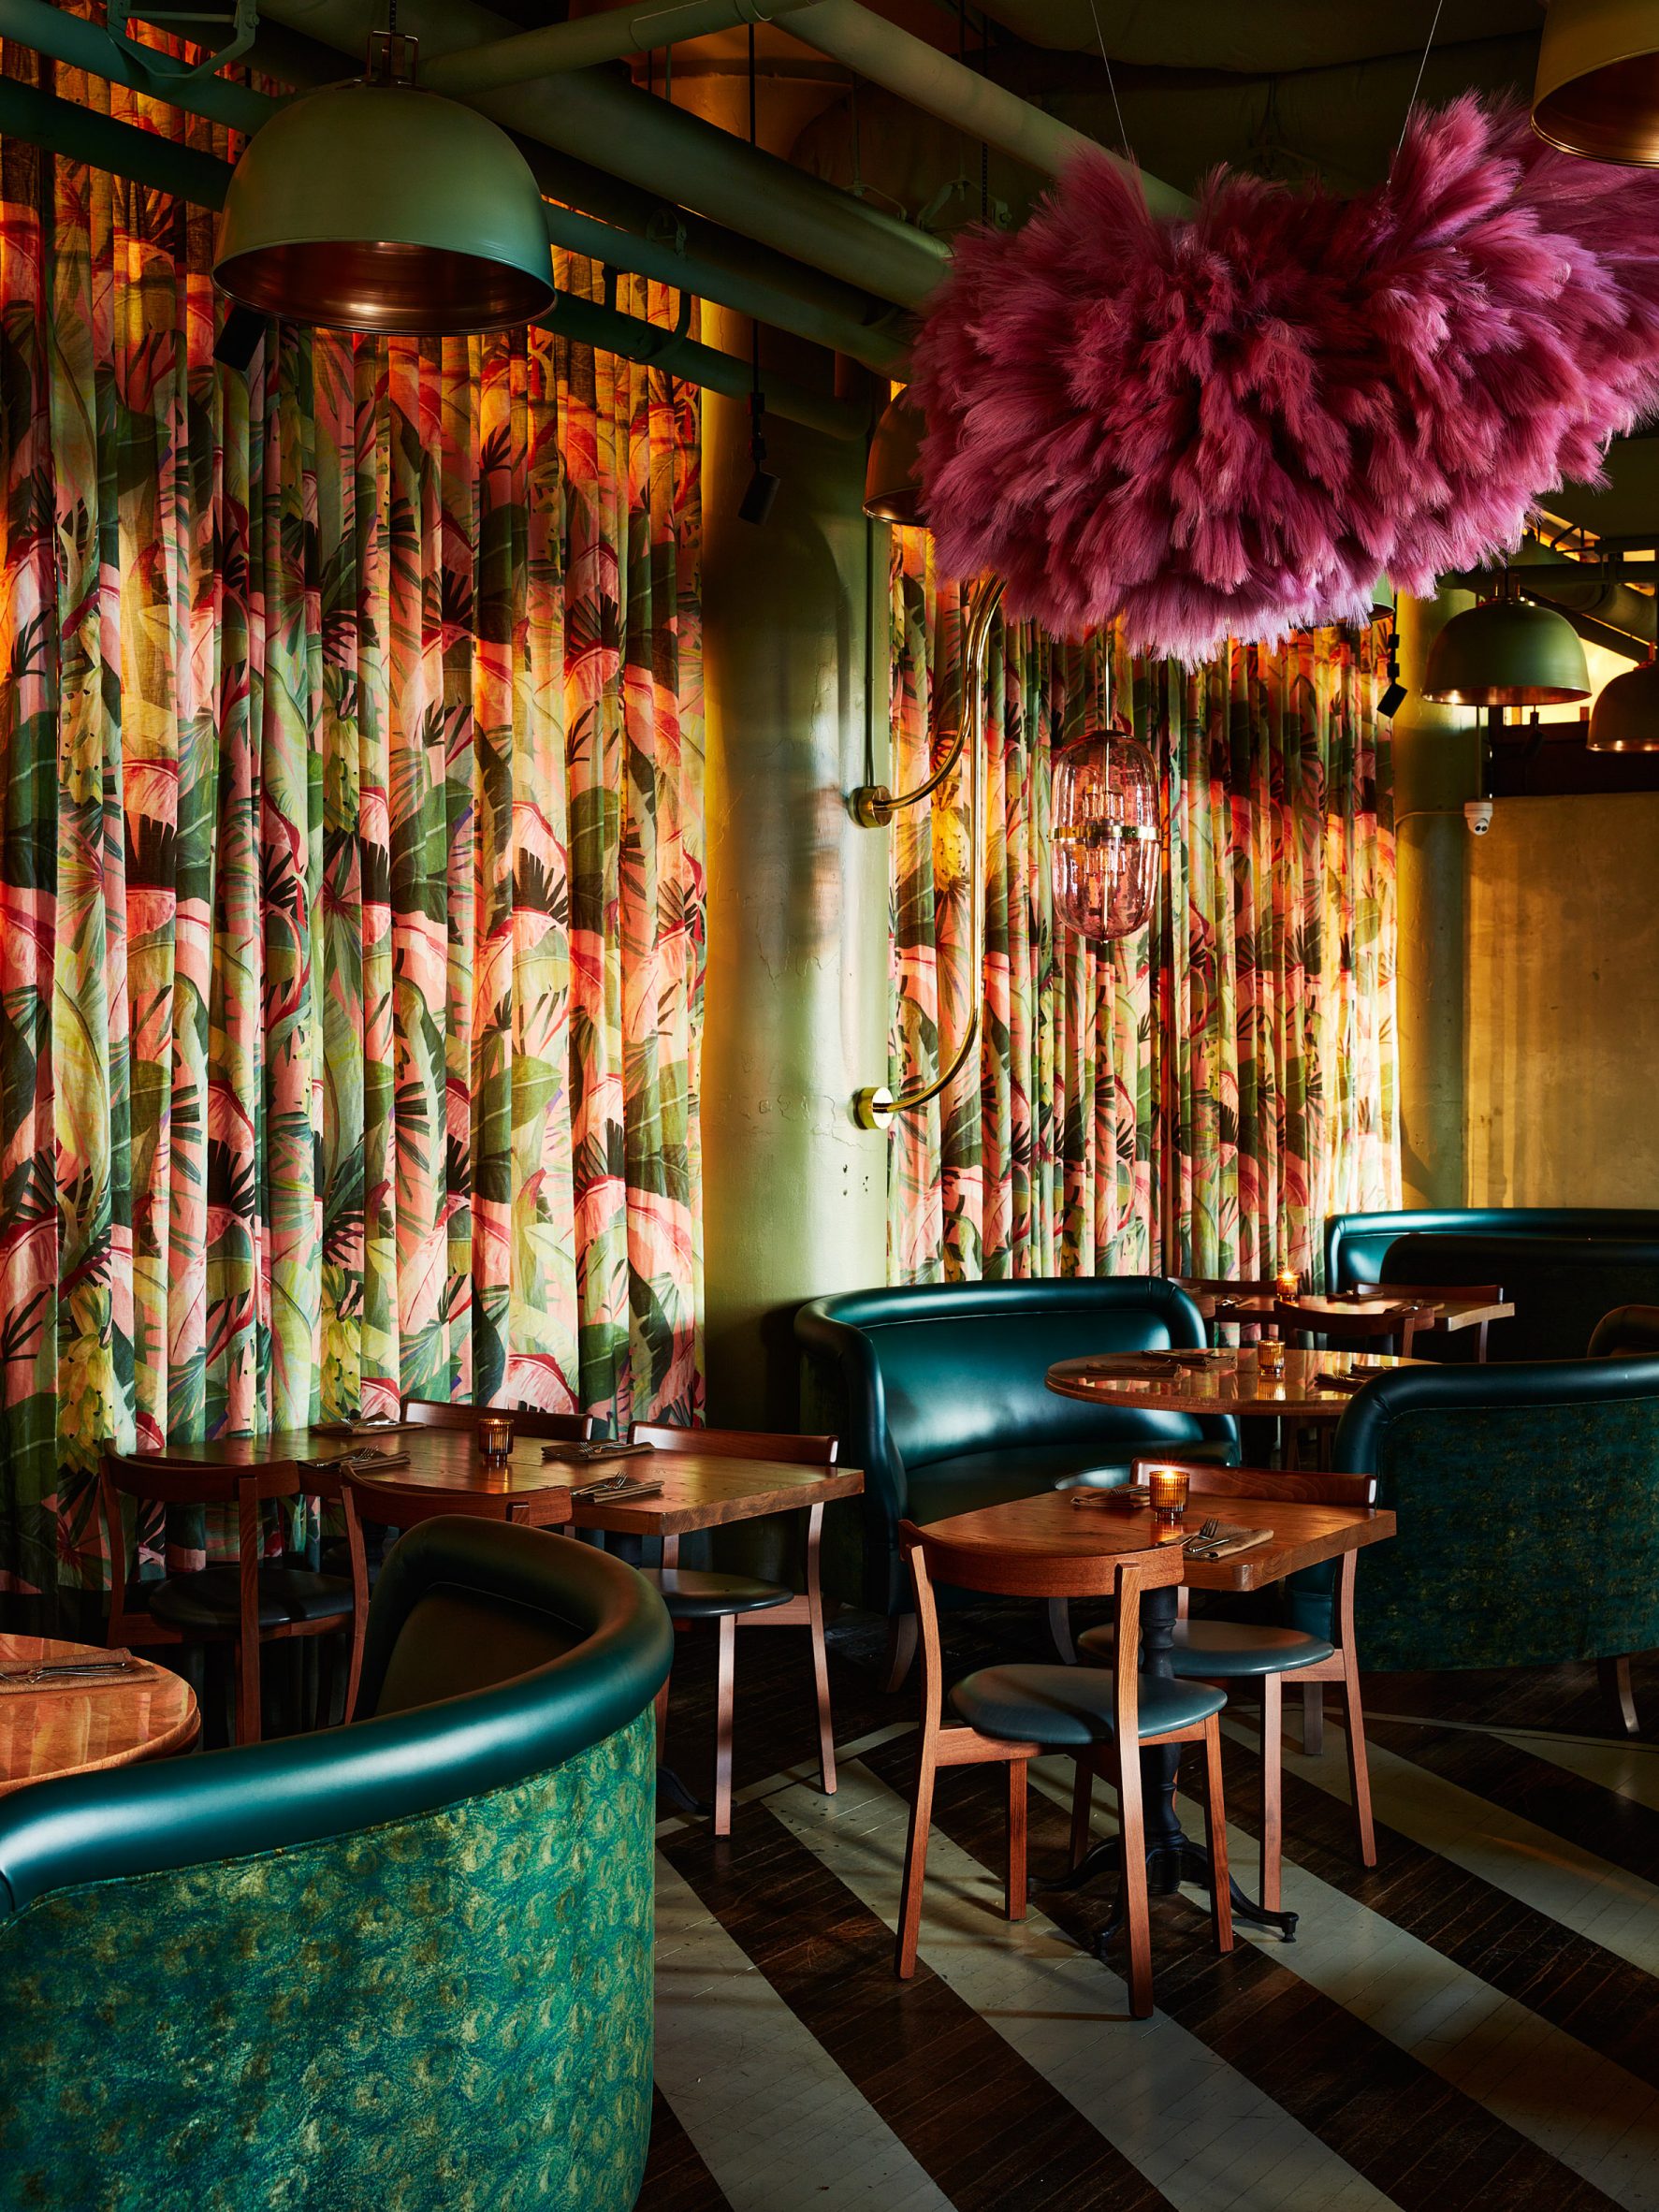 Tropical curtains and pink floral installations